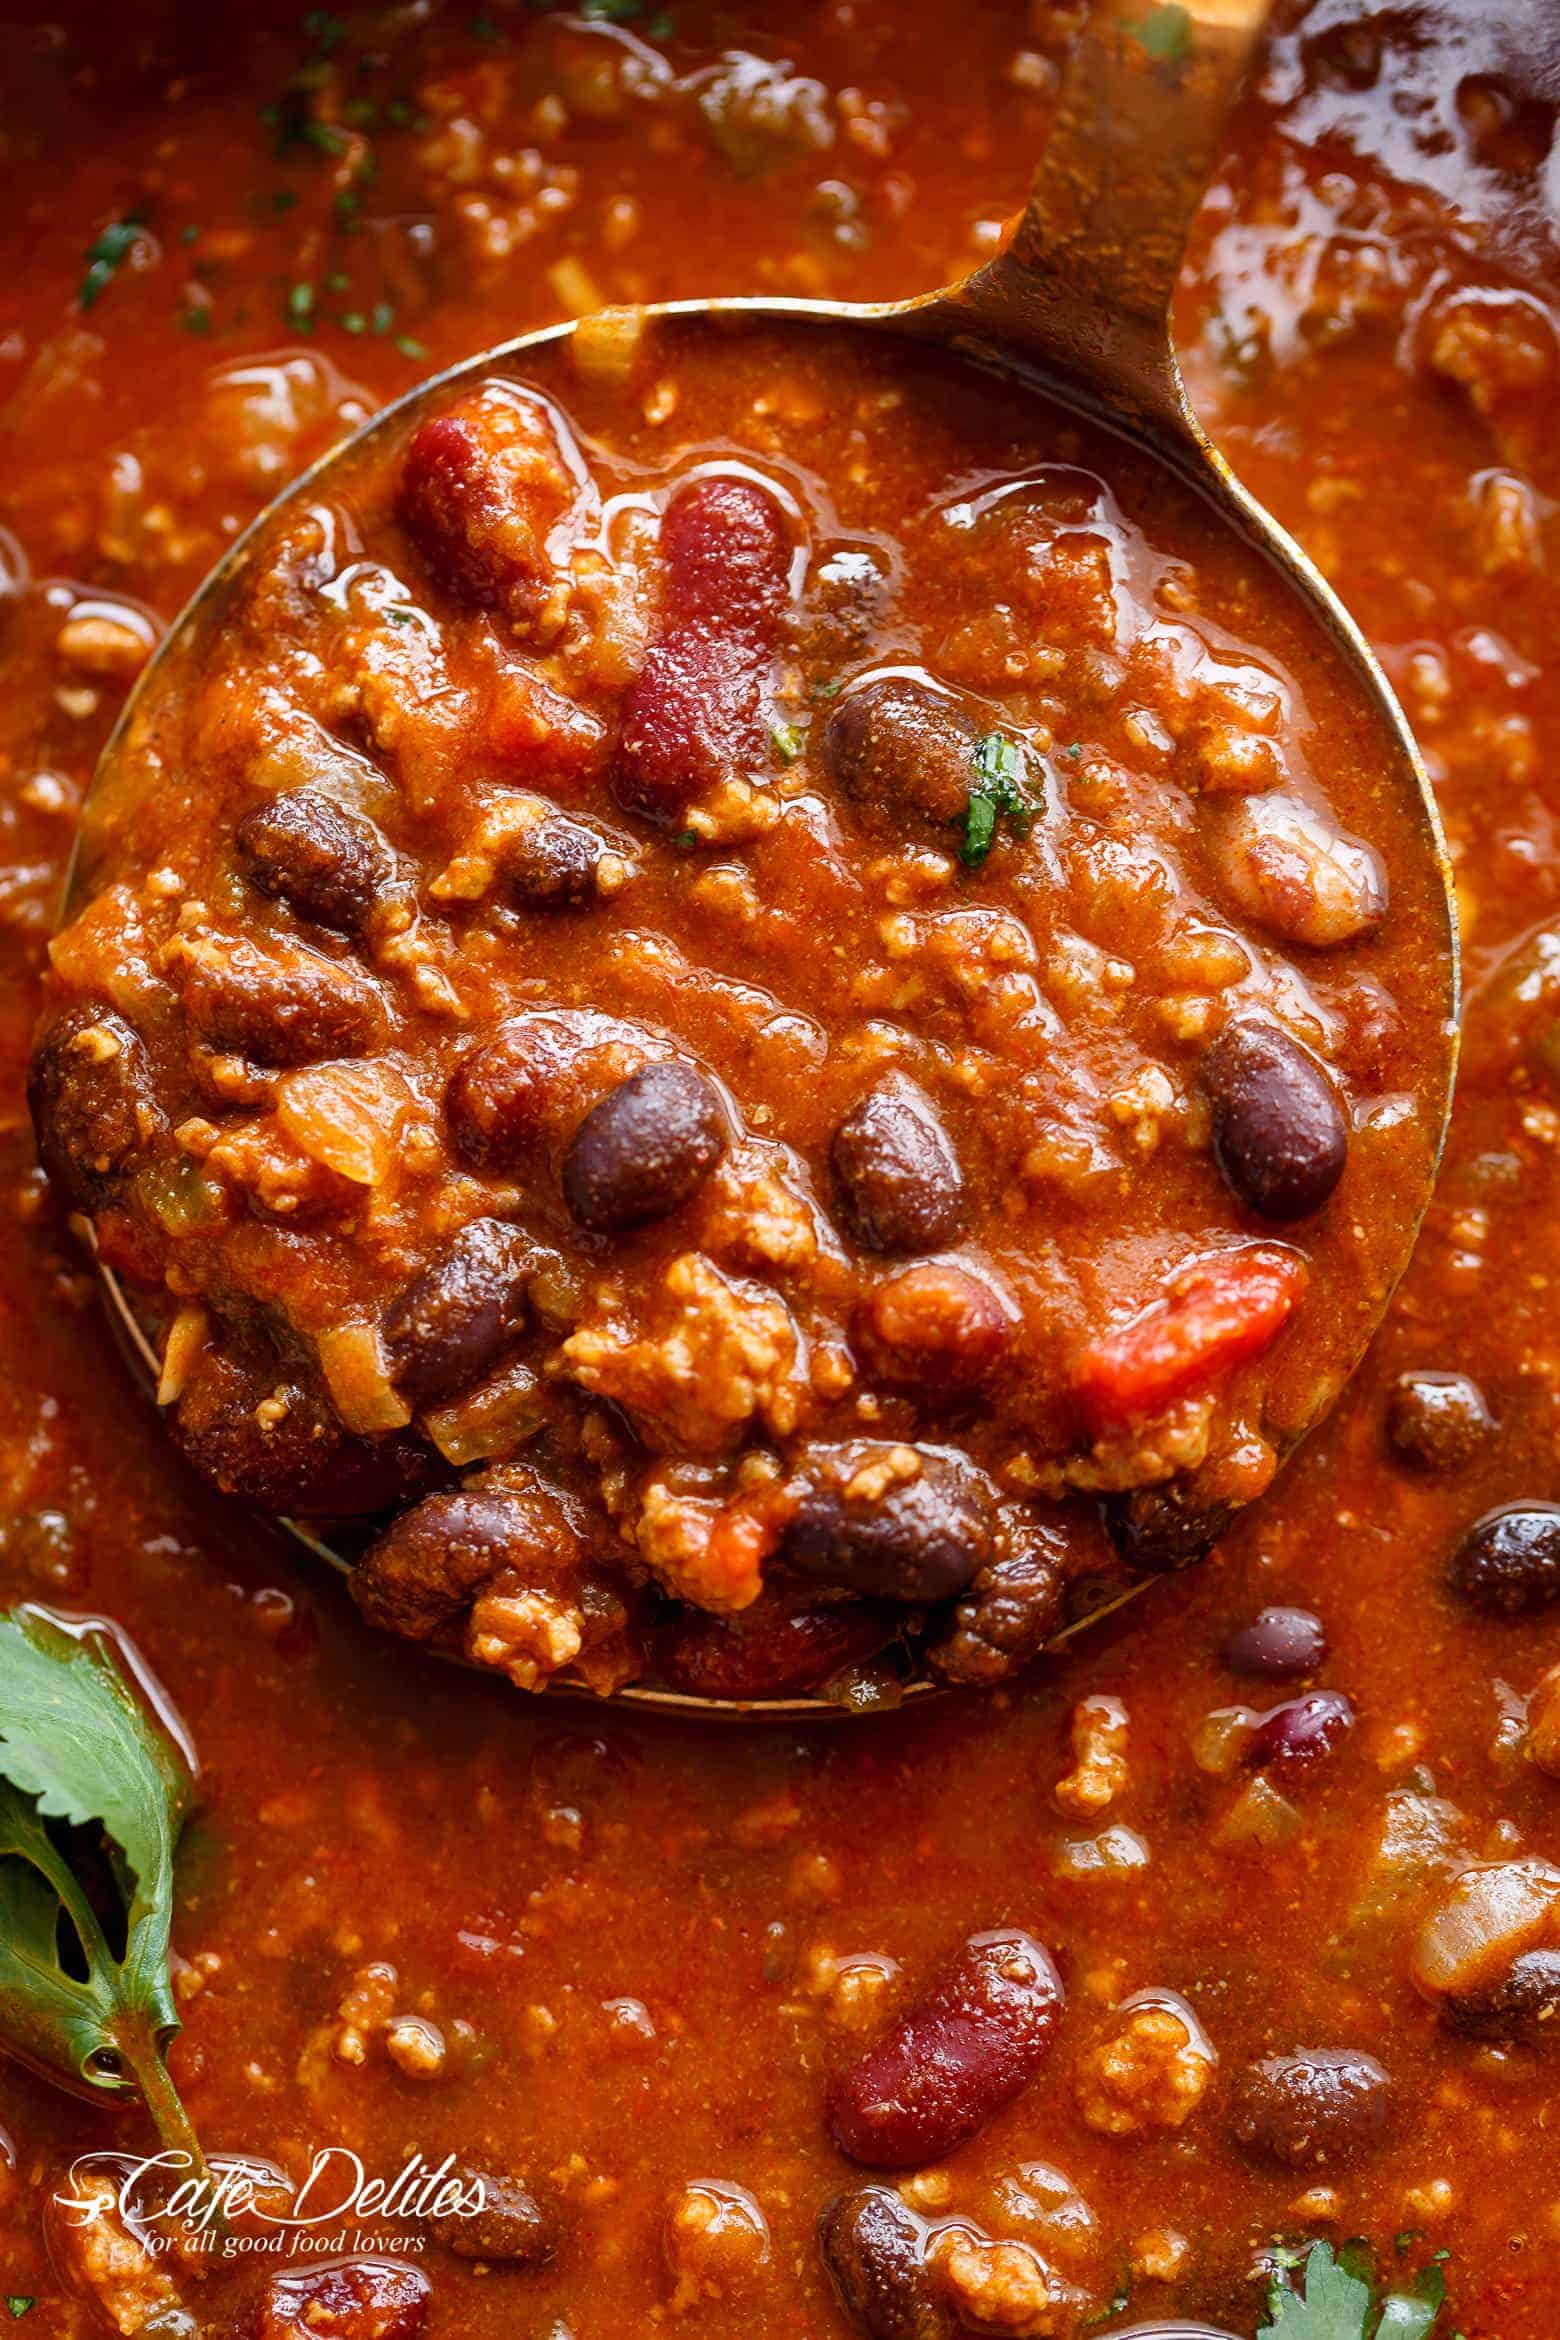 Beef & Bean Jalapeño Chili is one of the best and easiest chili's ready in under 30 minutes! Full of ground beef, beans and Jalapeño peppers! | Cafe Delites